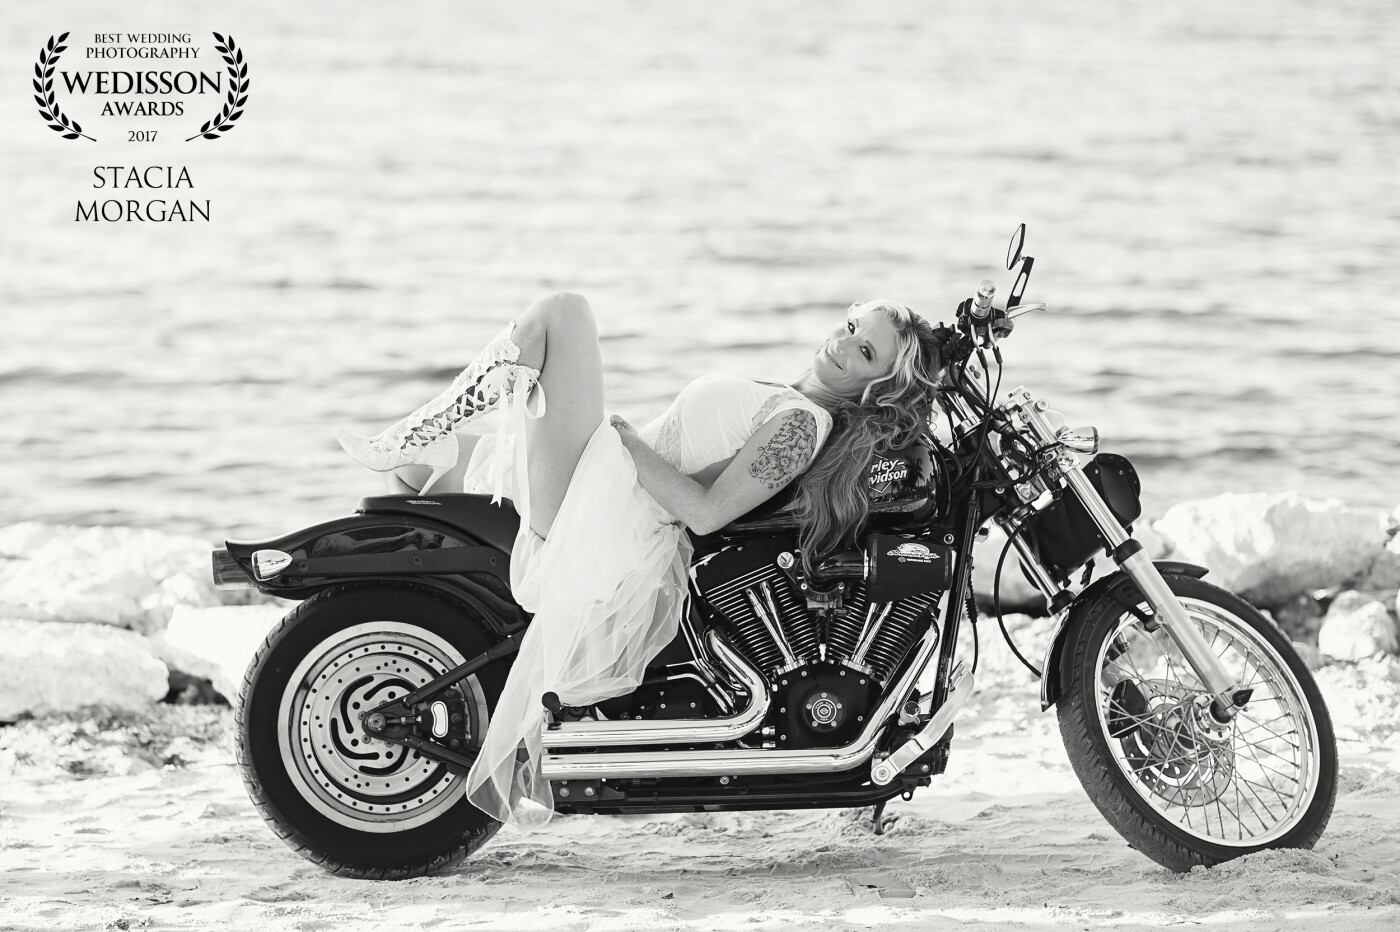 Renae’s Harley inspired wedding day was so kick butt, I had to get a shot of her draped on her man’s motorcycle! It was the perfect bridal shot! The groom went wild. 